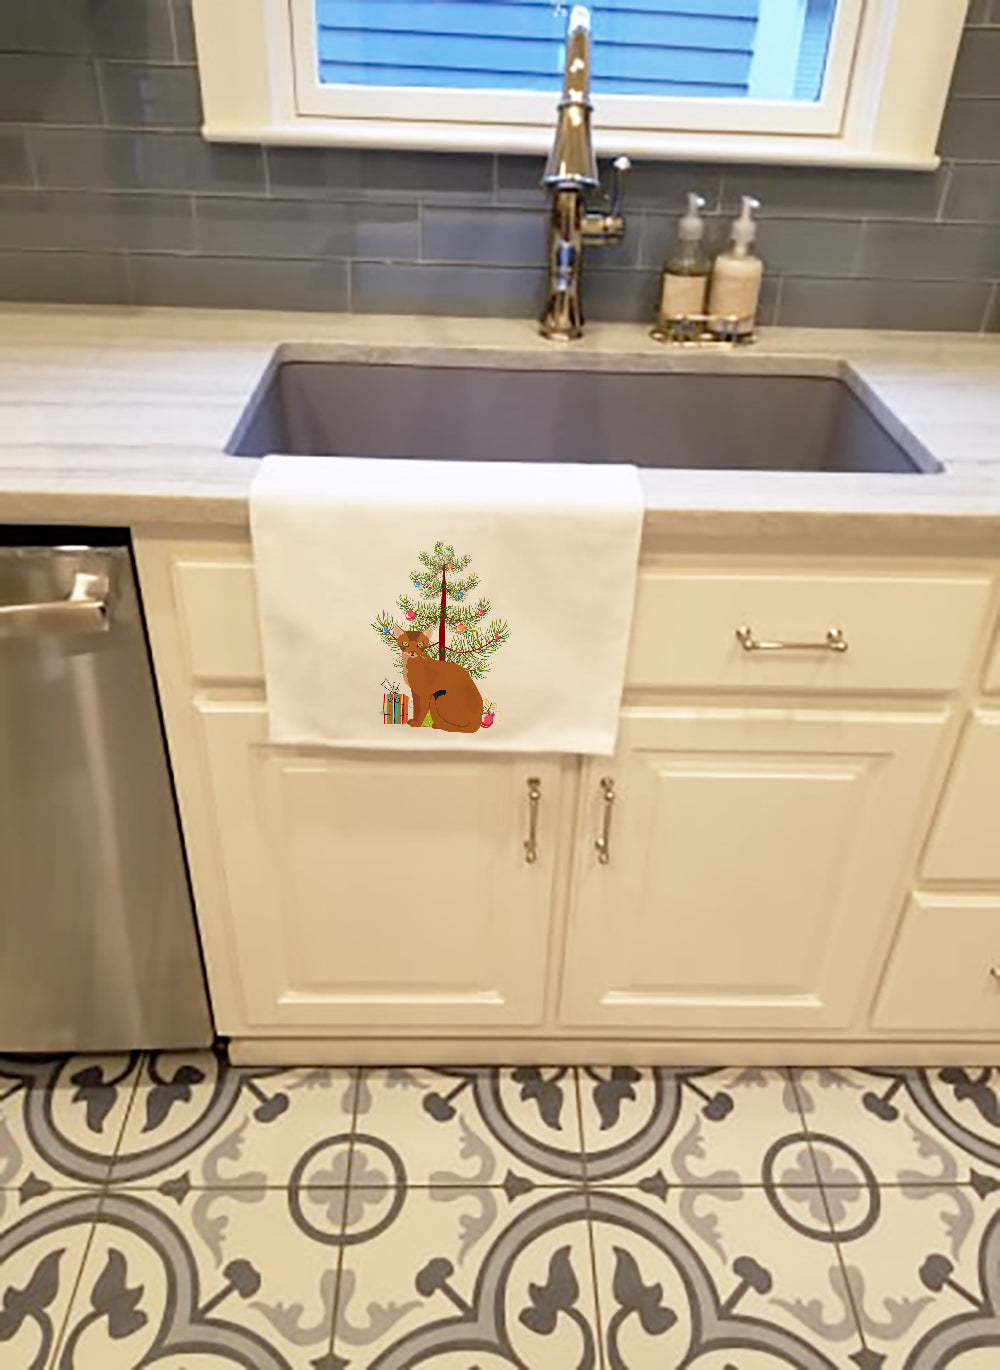 Buy this Abyssinian Cat Merry Christmas White Kitchen Towel Set of 2